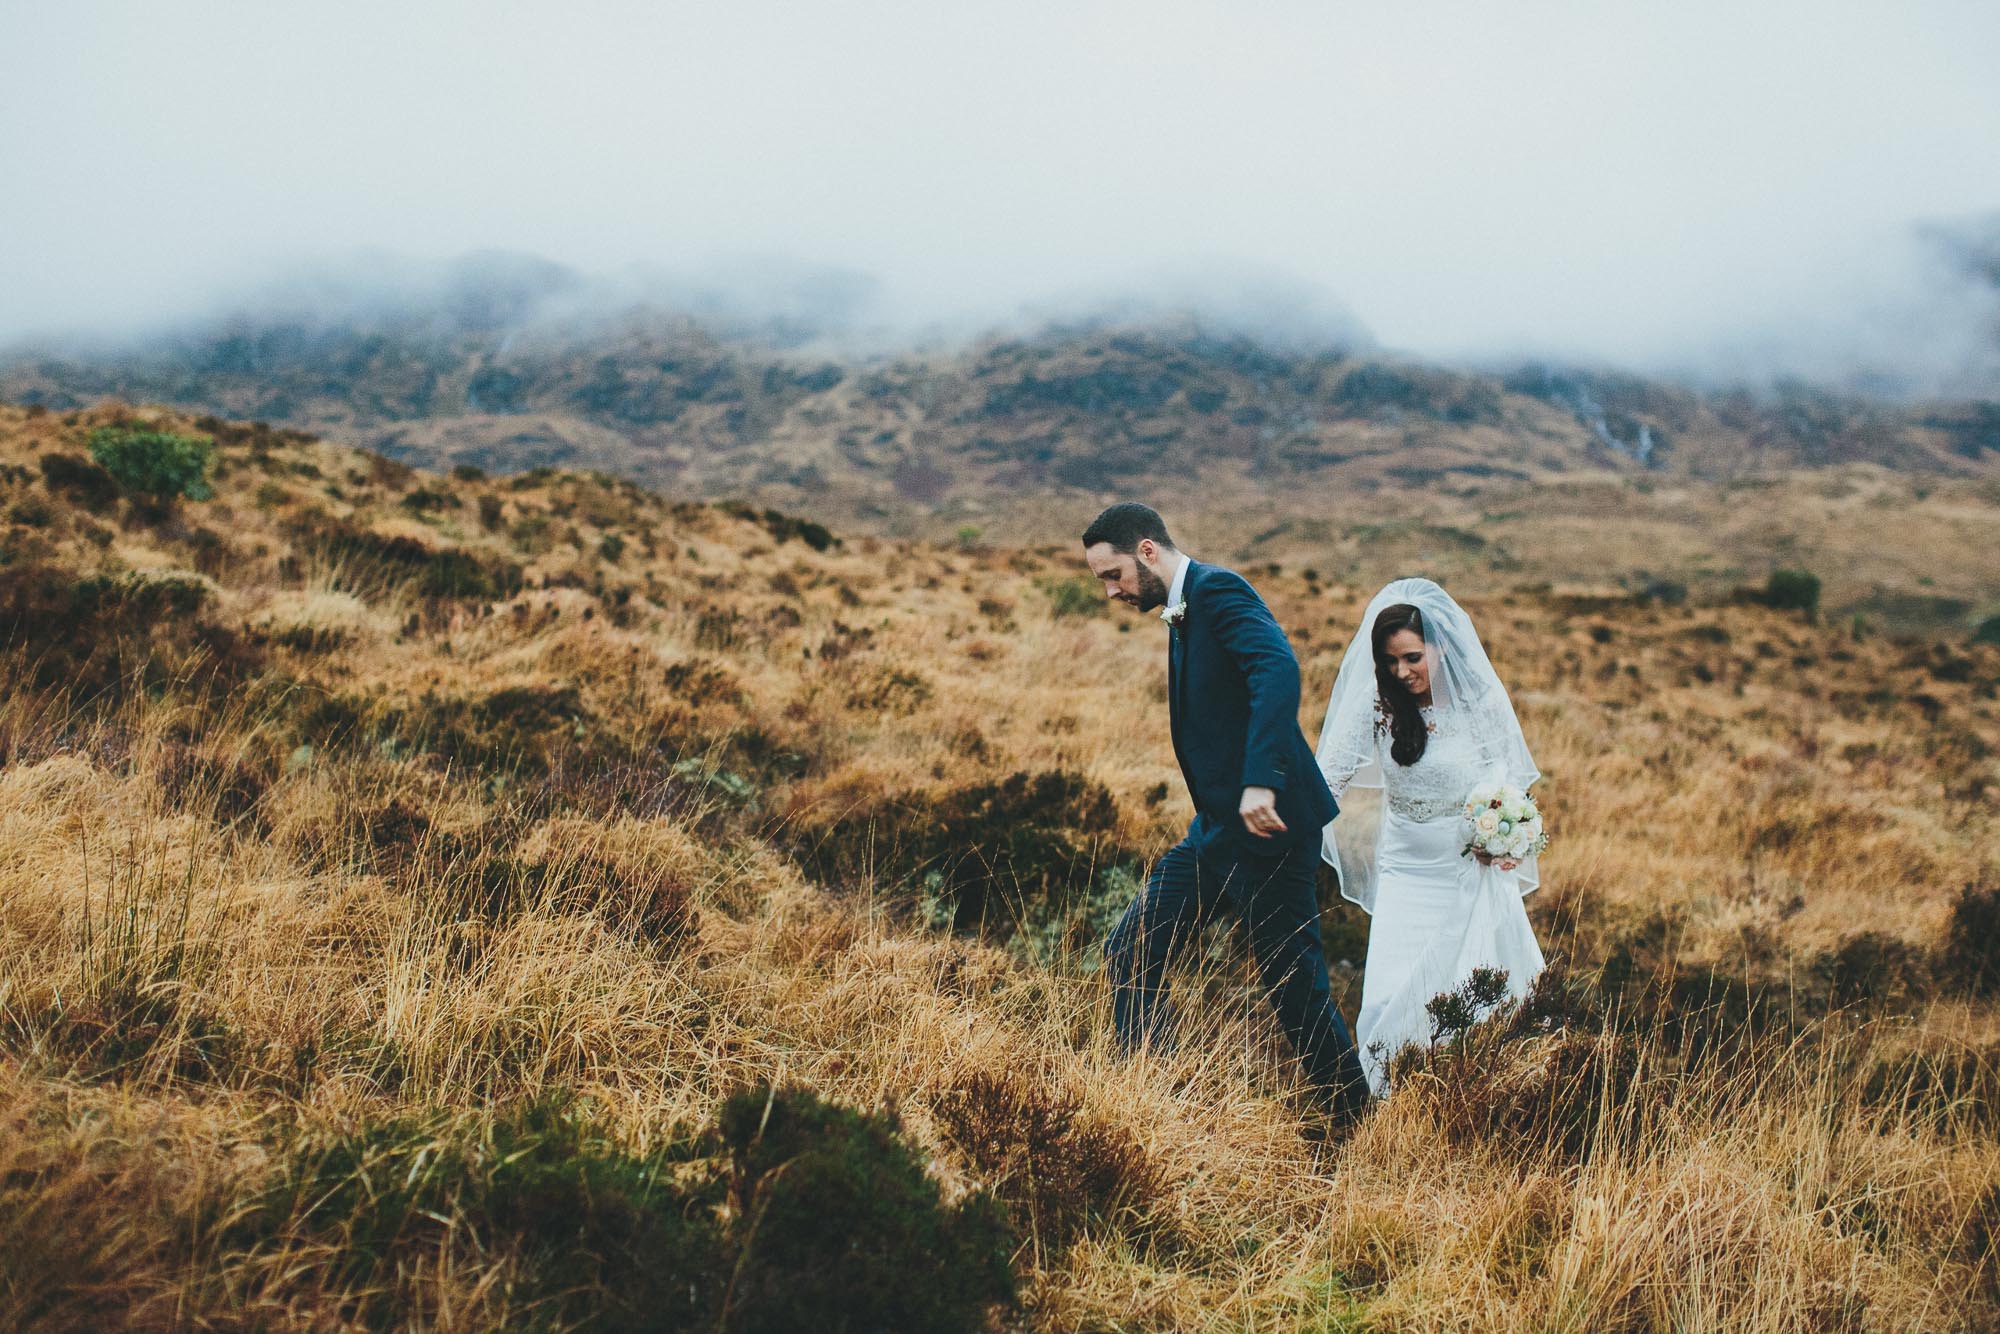 Donegal wedding photographer